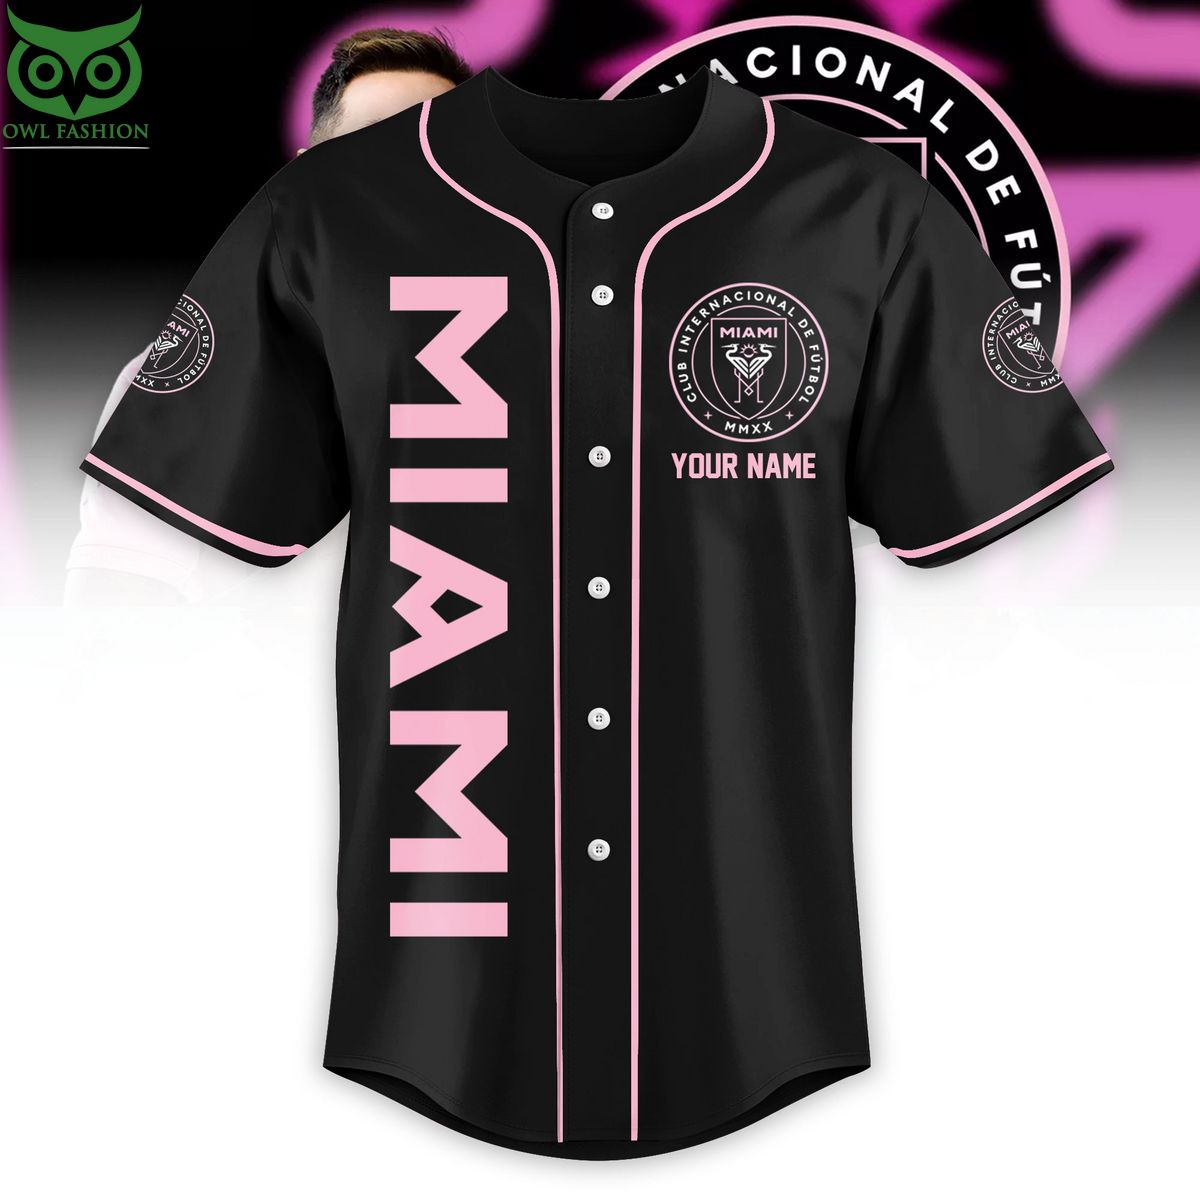 Lionel Messi Pink Baseball Jersey Shirt This design is absolutely stunning.